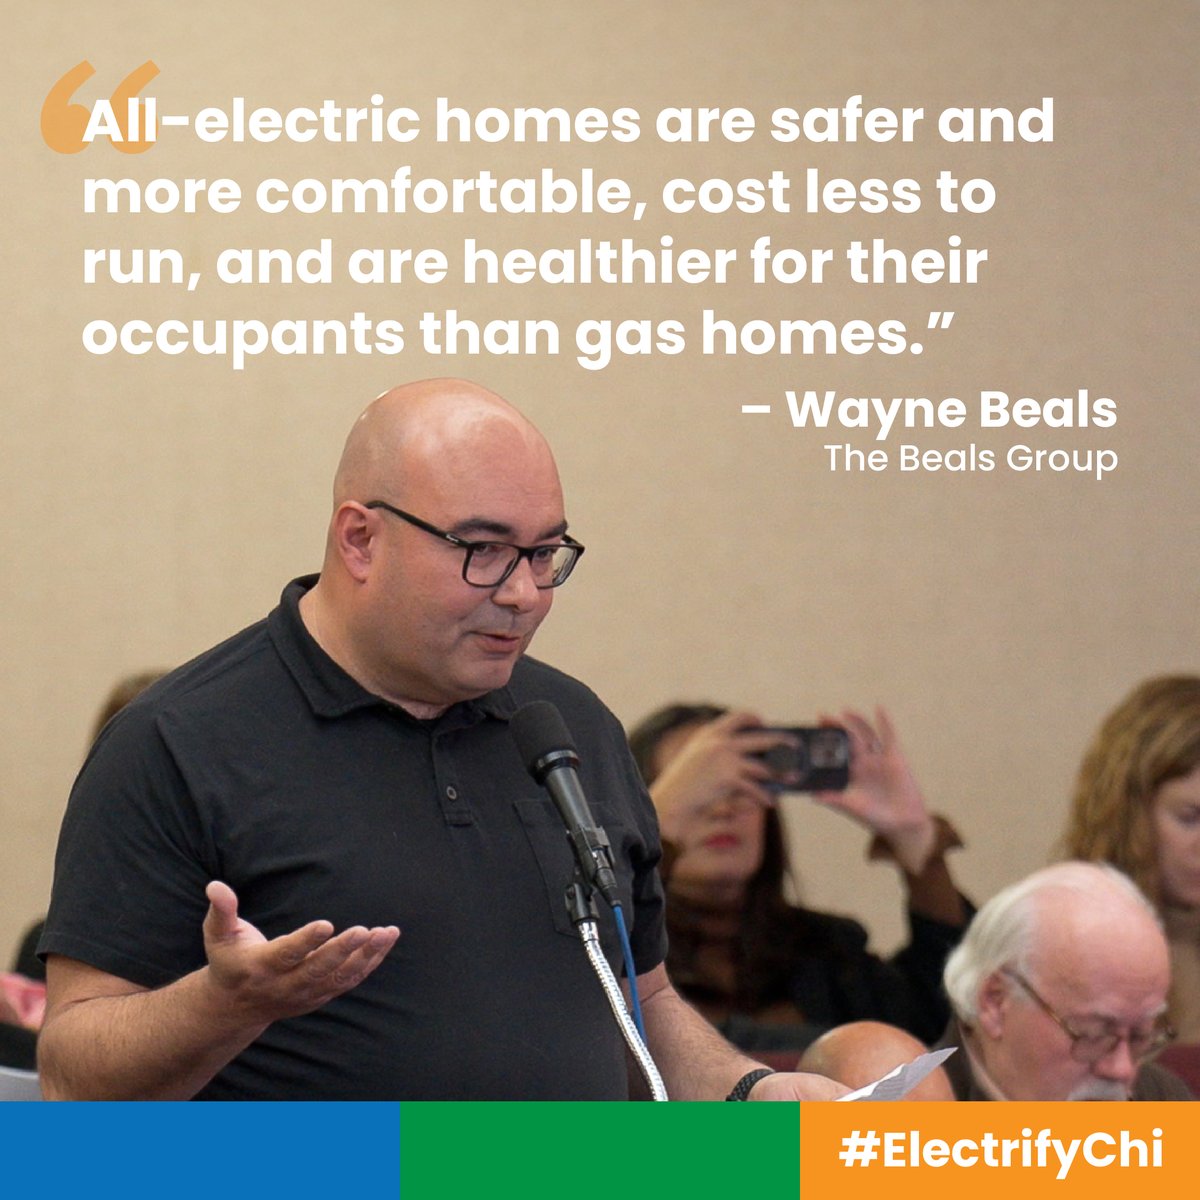 Thanks to realtor @waynebeals for speaking out in favor of the Clean & Affordable Buildings Ordinance and the transition to clean energy homes #ElectrifyChi